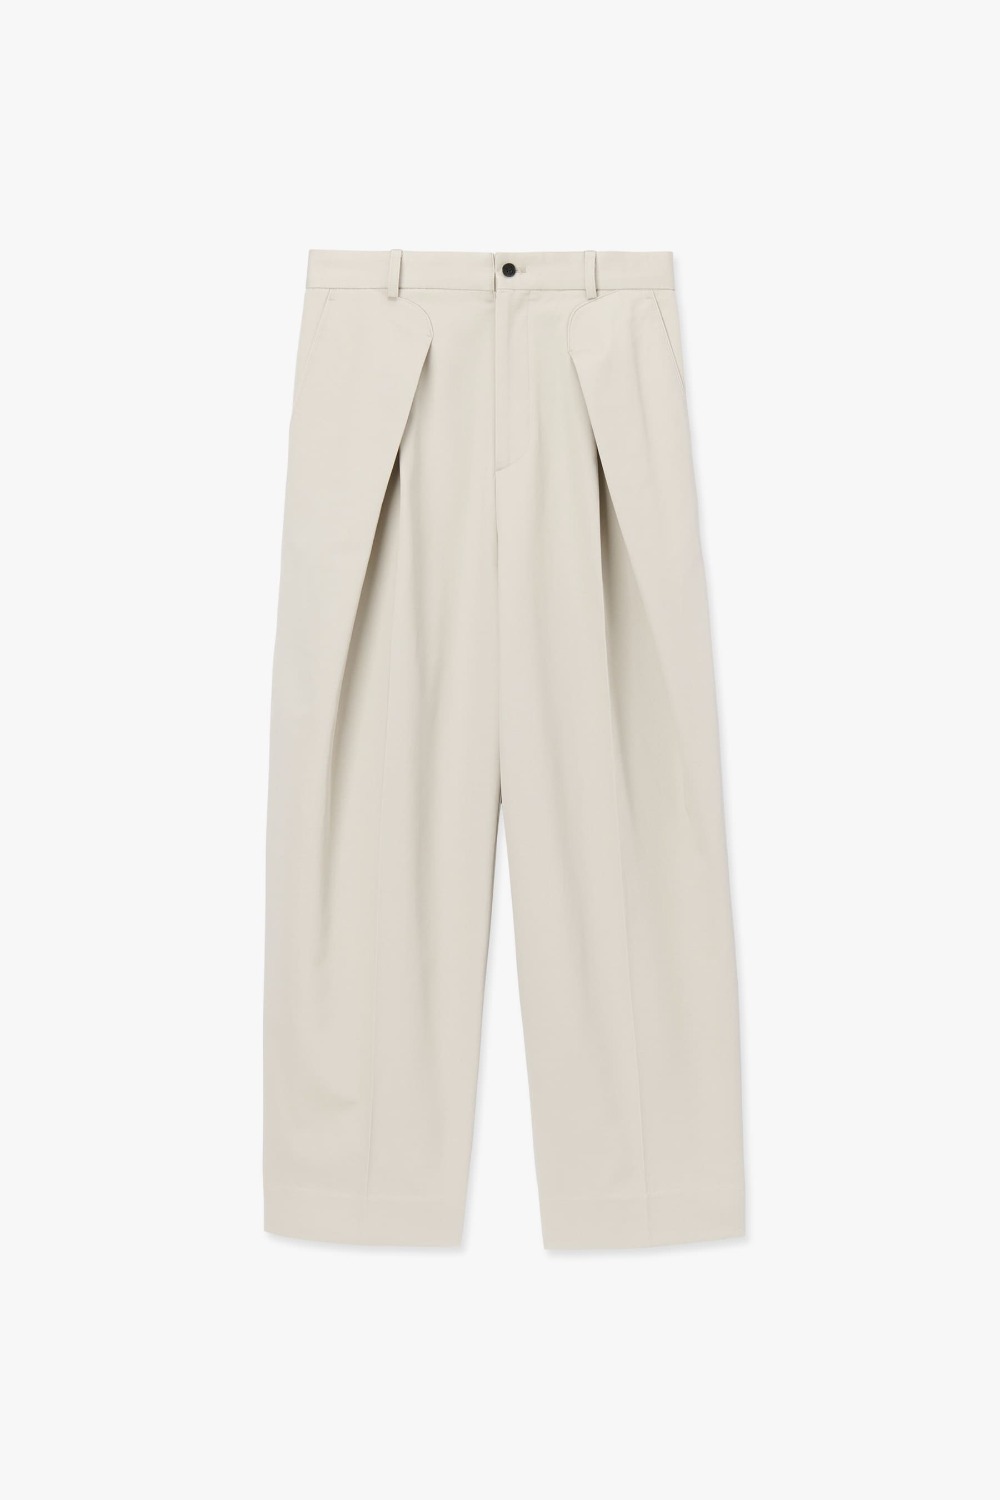 COTTON LIGHT GREY OVERLAP TWO TUCK WIDE PANTS